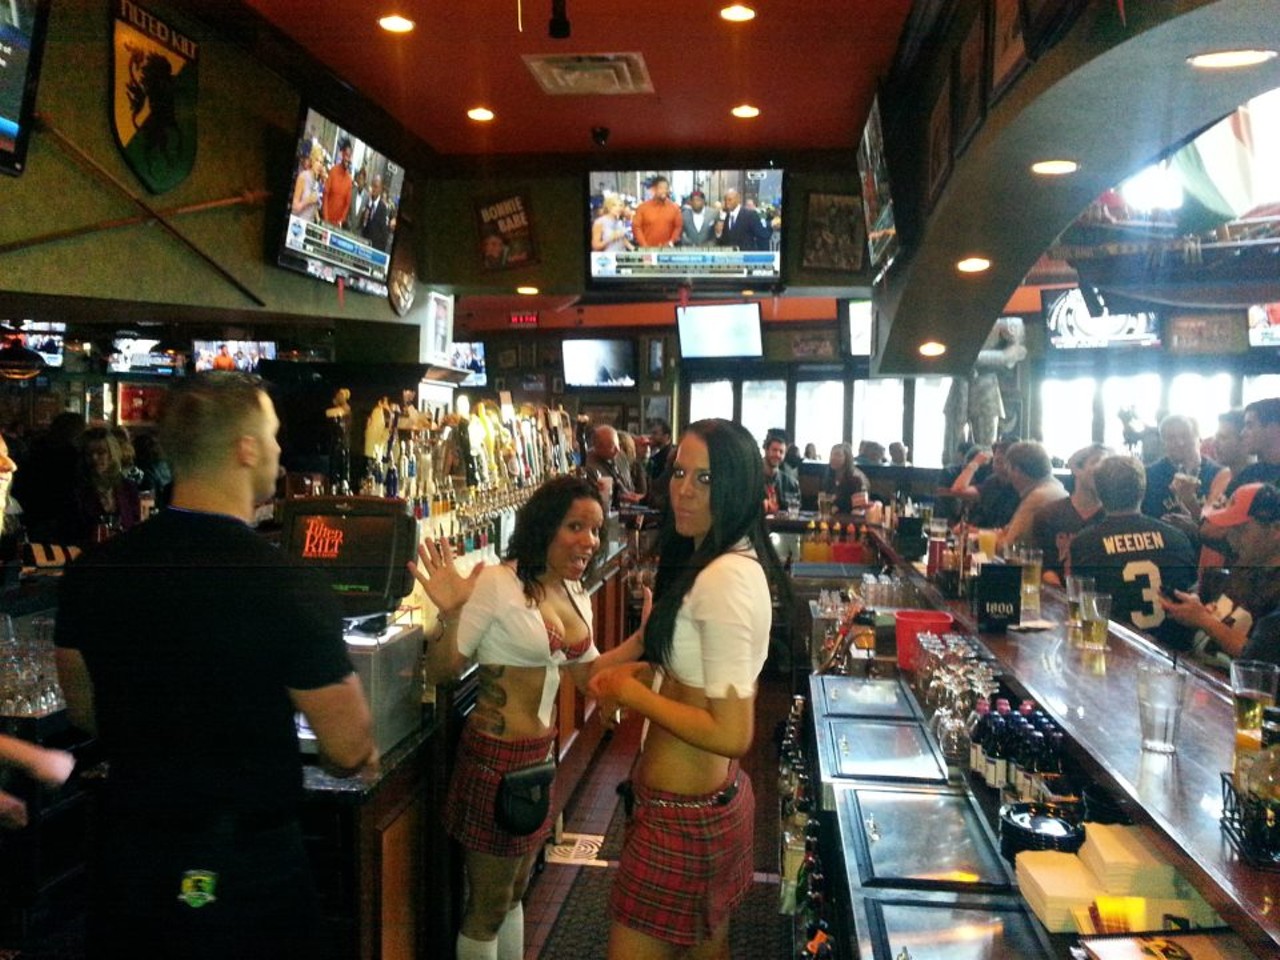 Tilted Kilt is located at 21 Prospect Ave. Call (216) 771-5458 for more information.